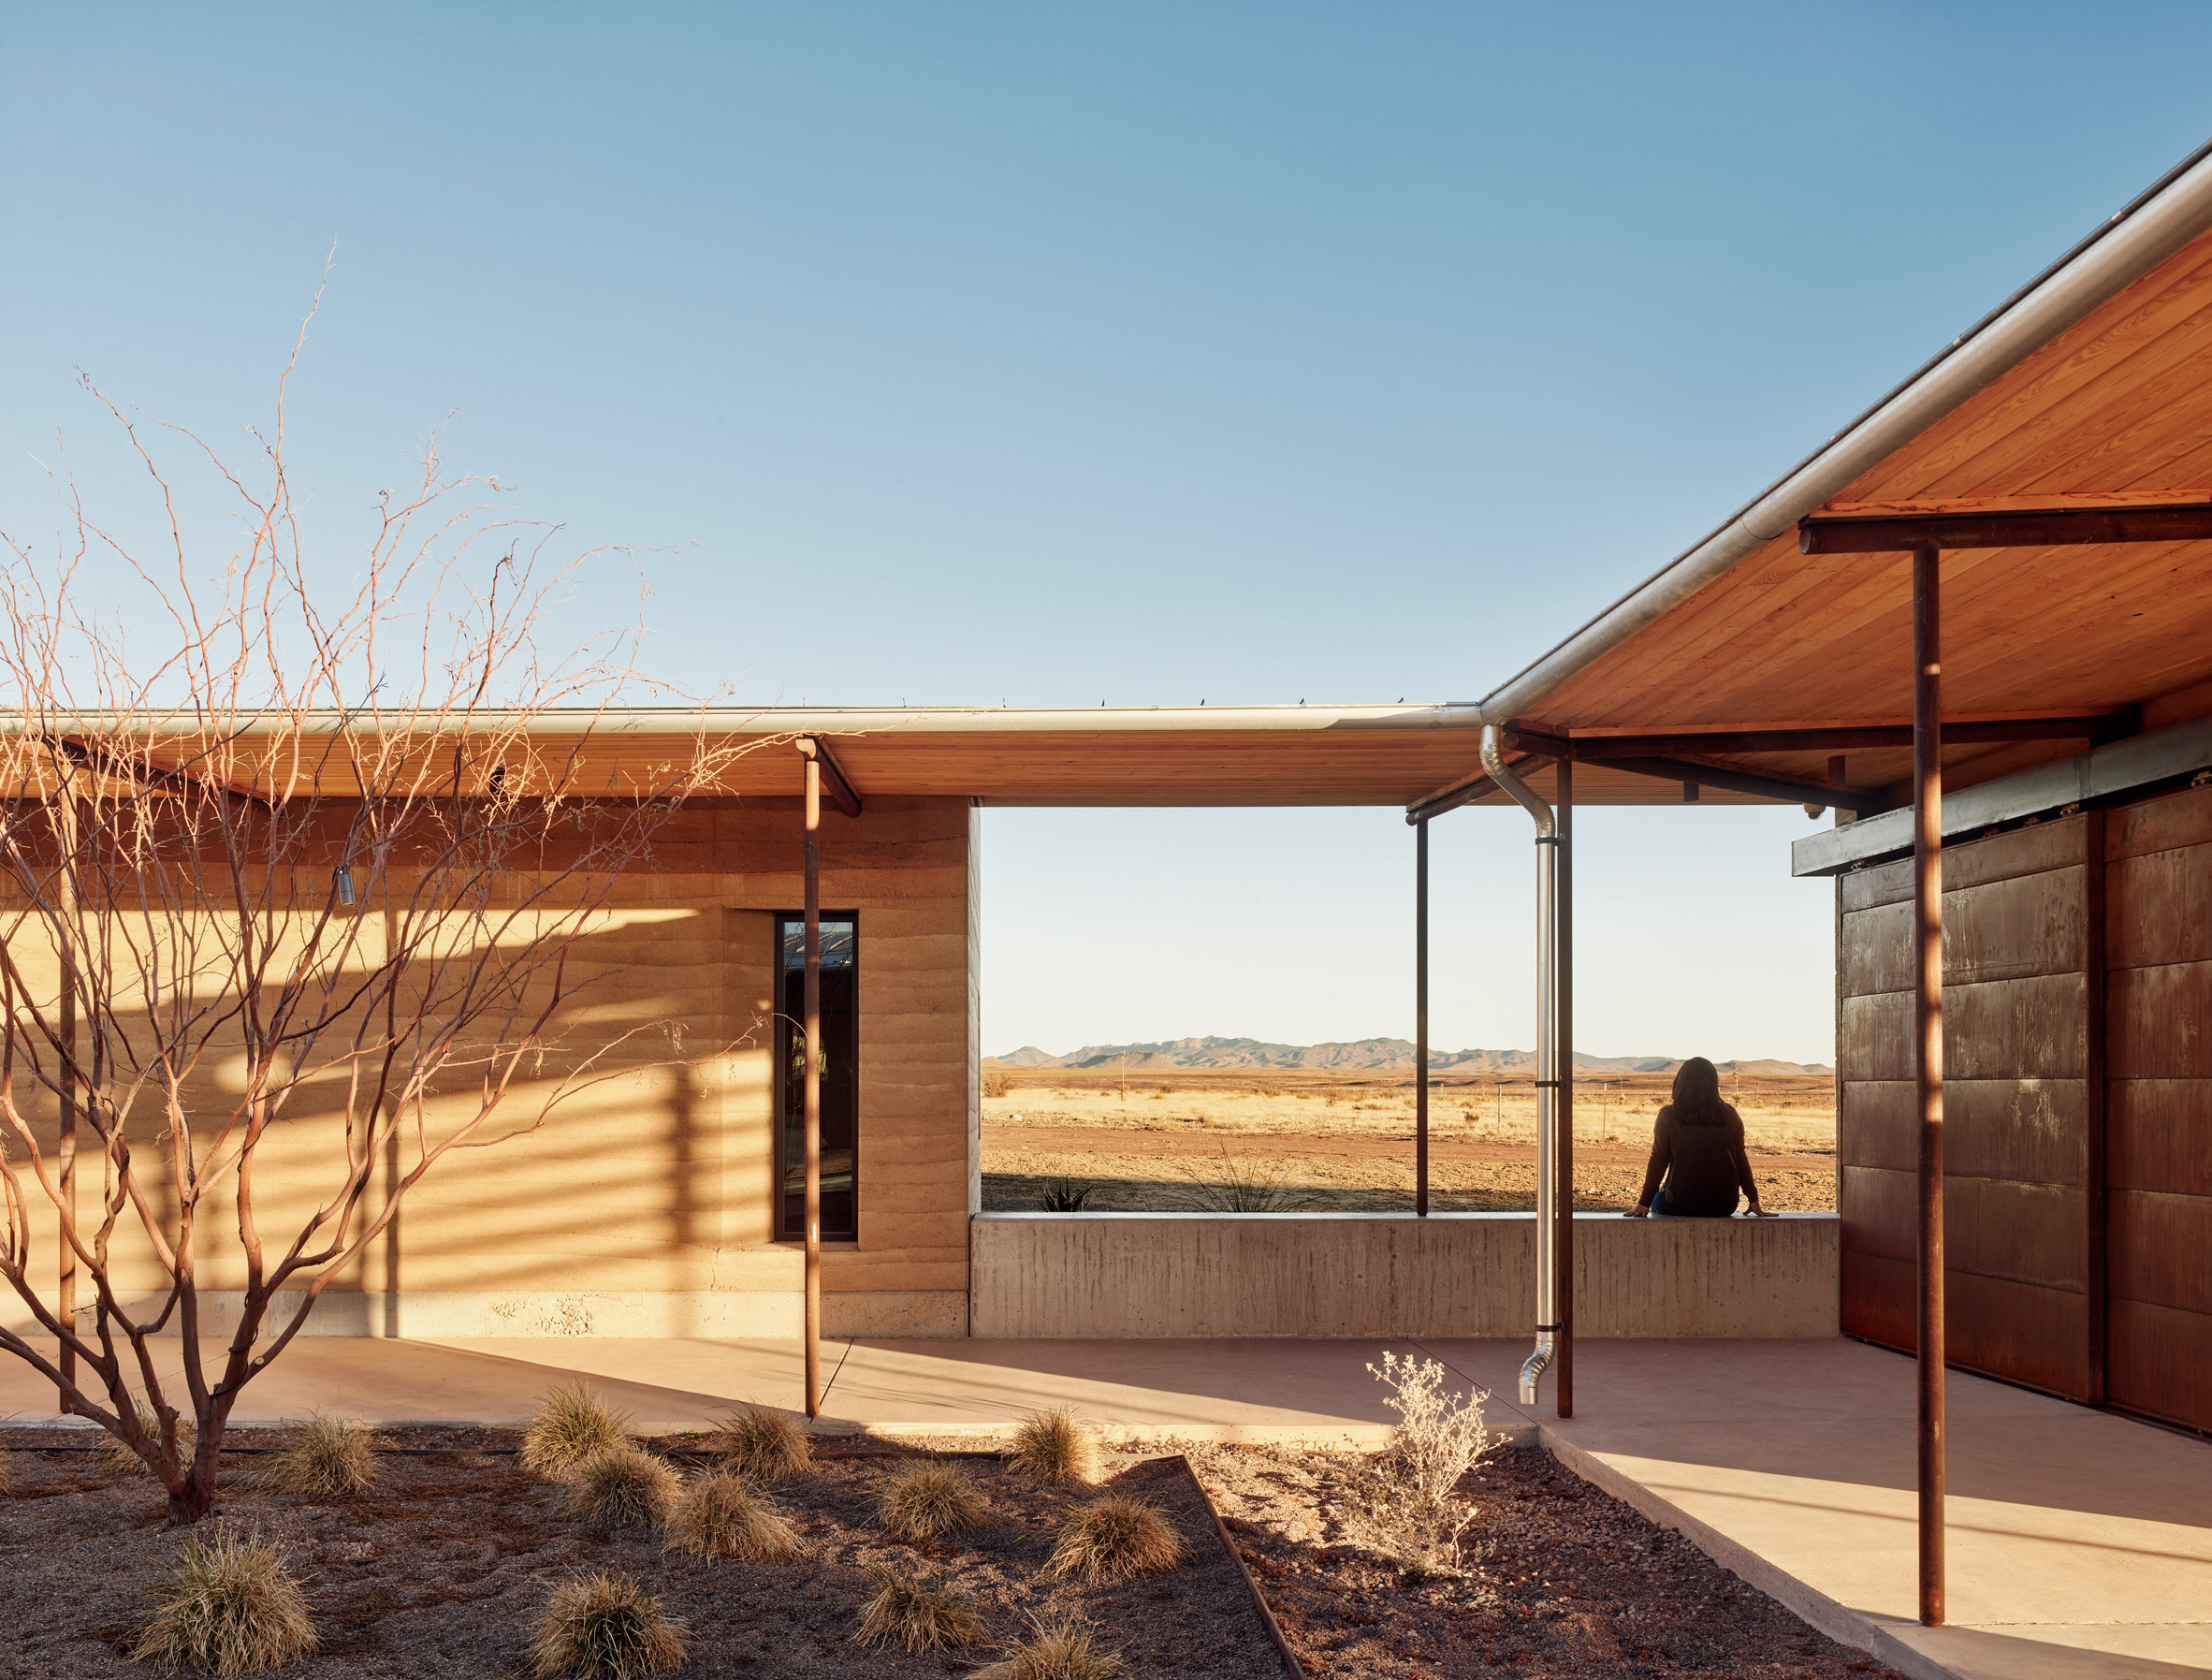 Rammed earth walls of house with covered walkway and central courtyard